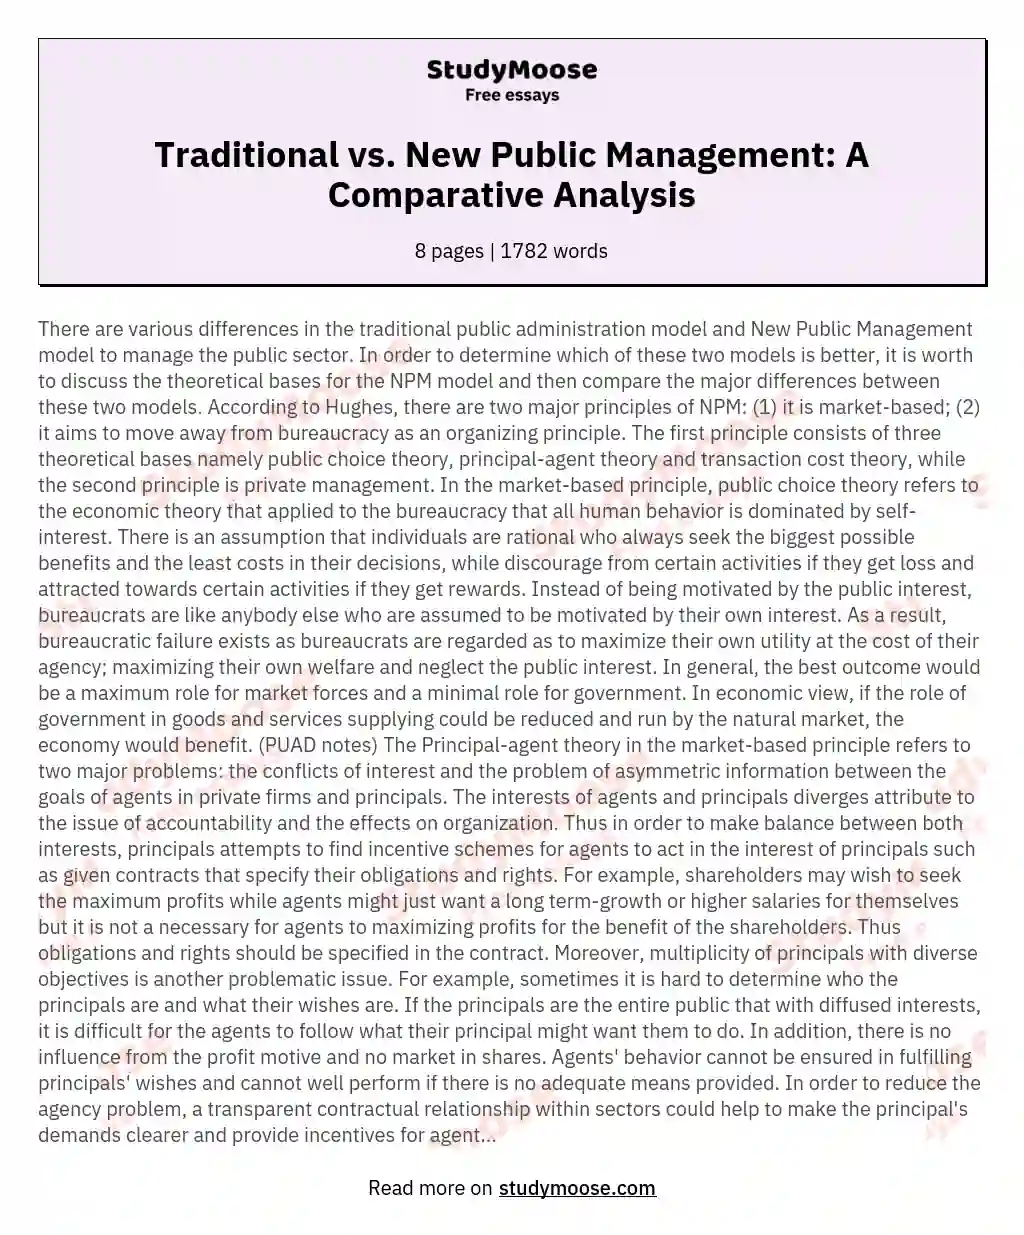 Traditional vs. New Public Management: A Comparative Analysis essay